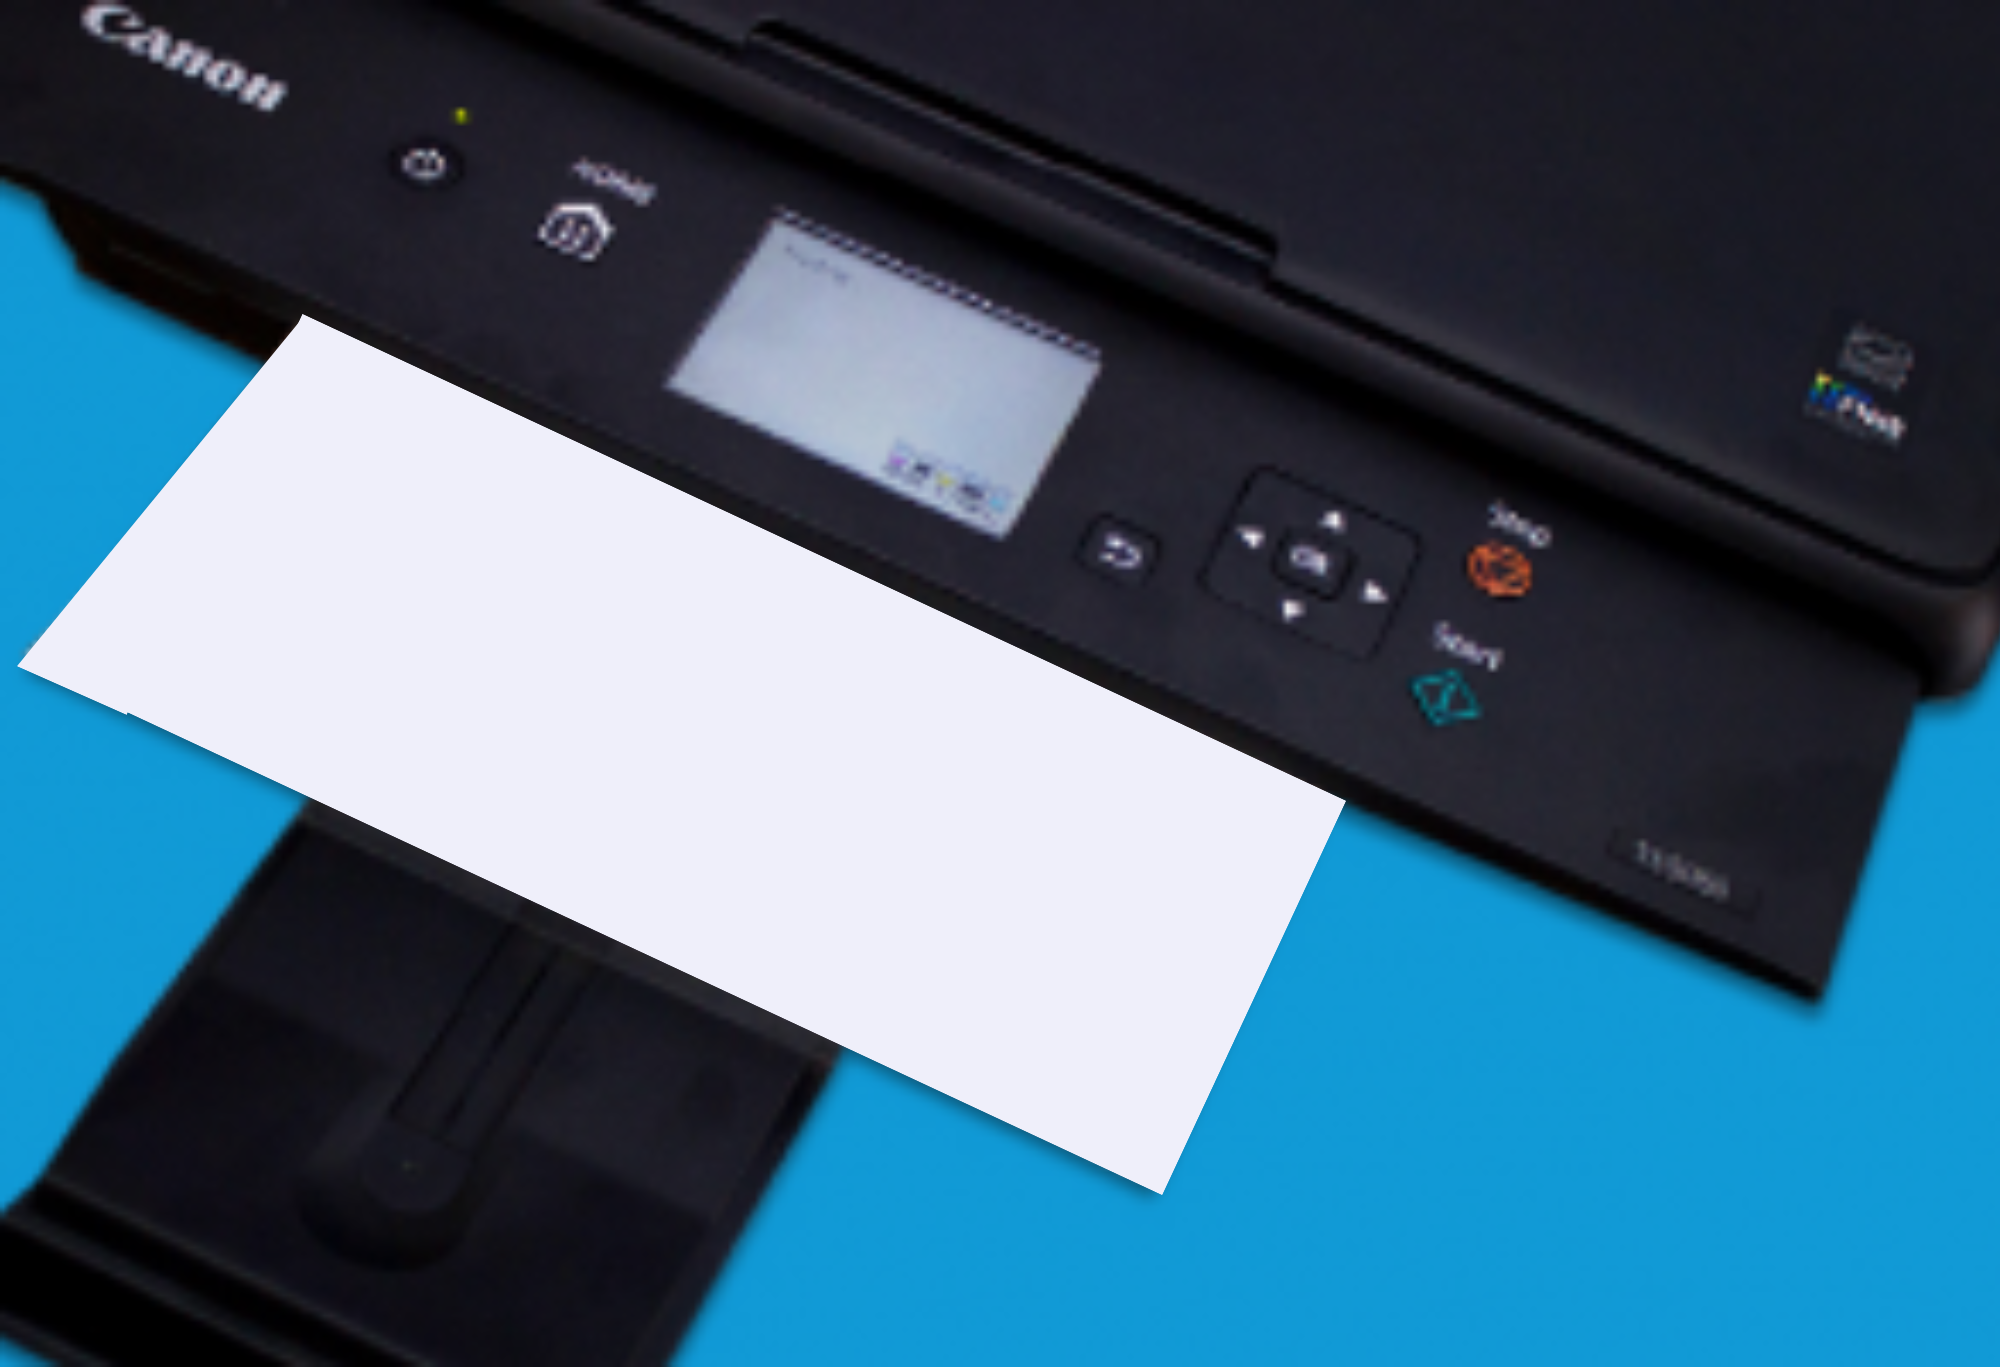 Why Did My Edible Ink Printer Print a Blank Page? - Edible Image Supplies